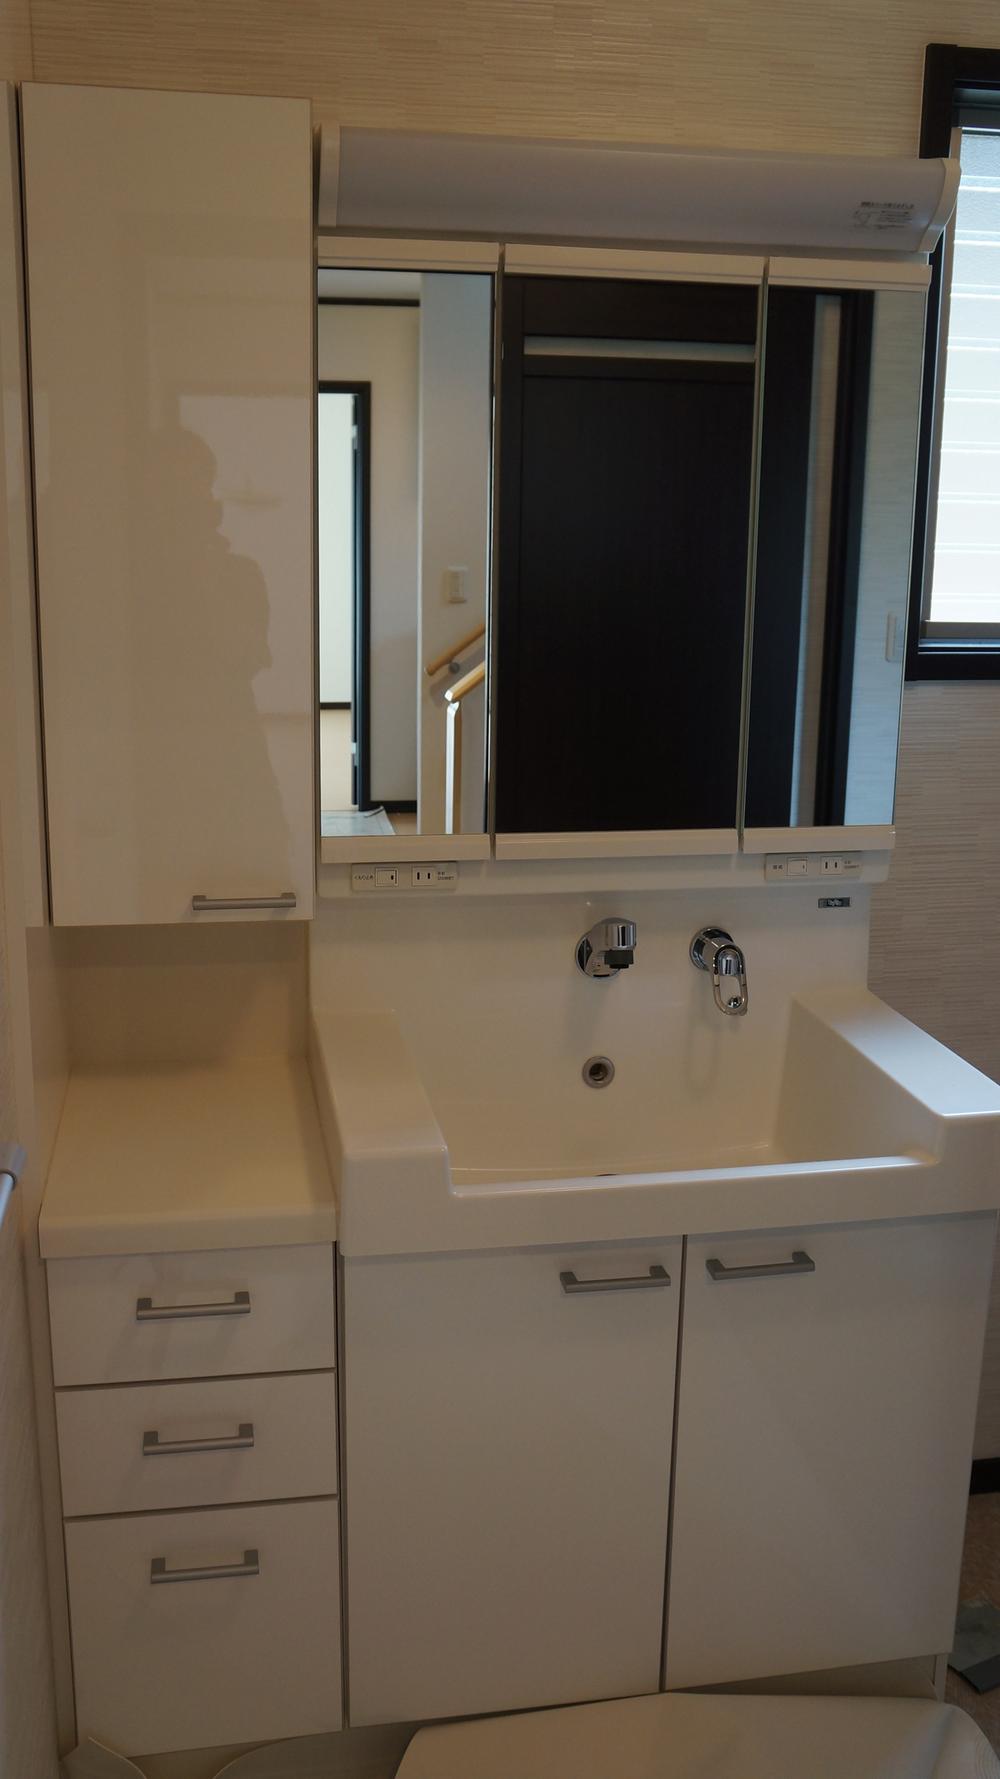 Wash basin, toilet. Vanity equipped with storage